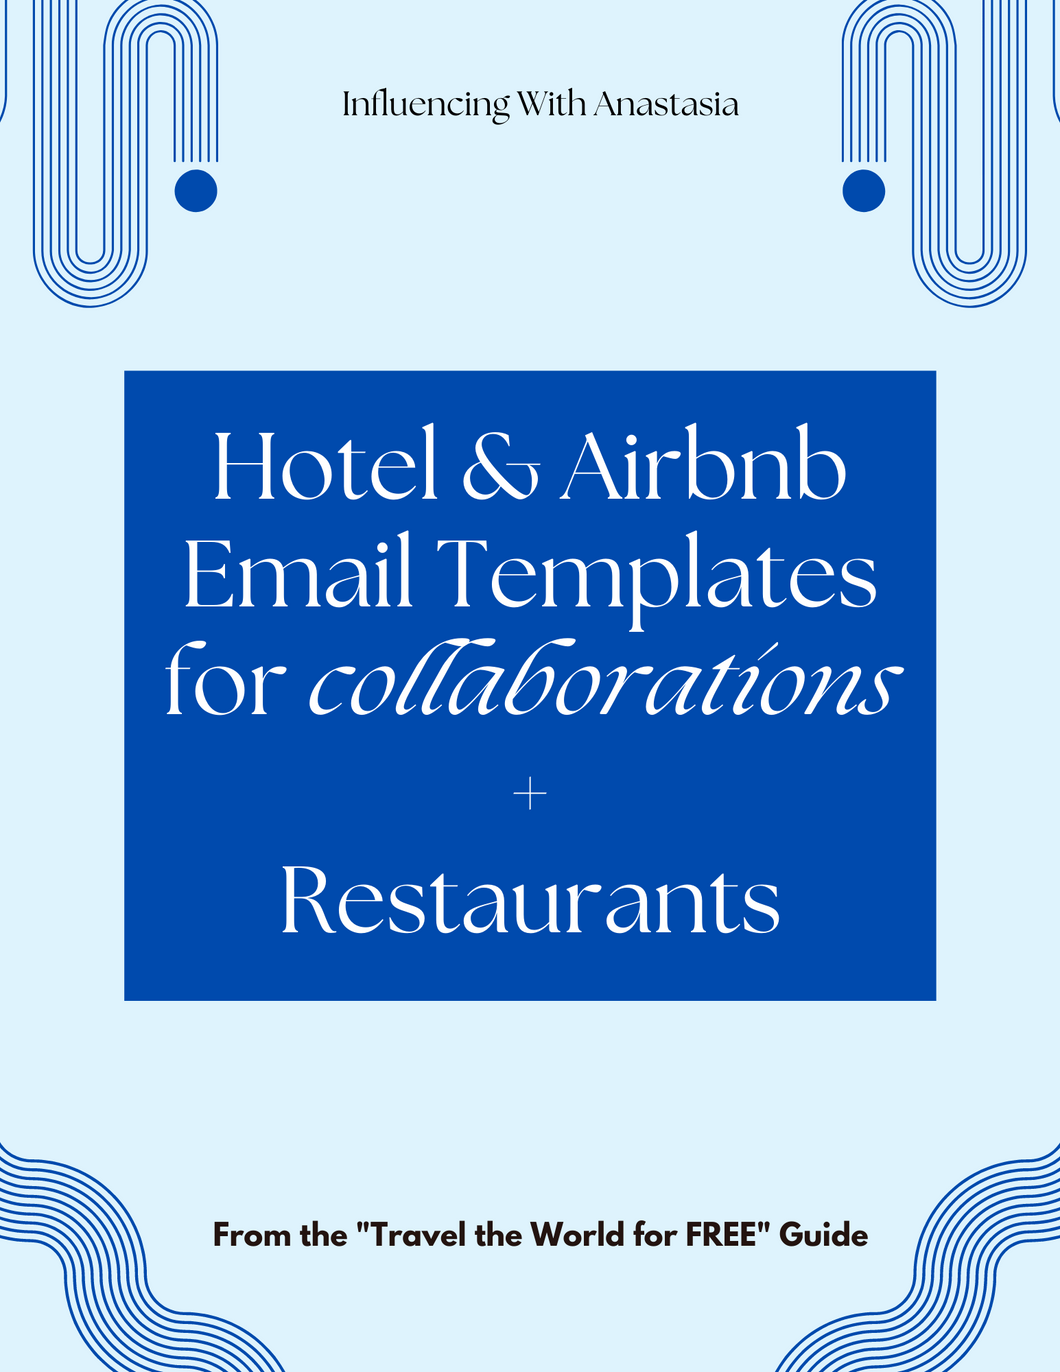 Hotel & Airbnb (+ Restaurant) Email Templates for Collaborations